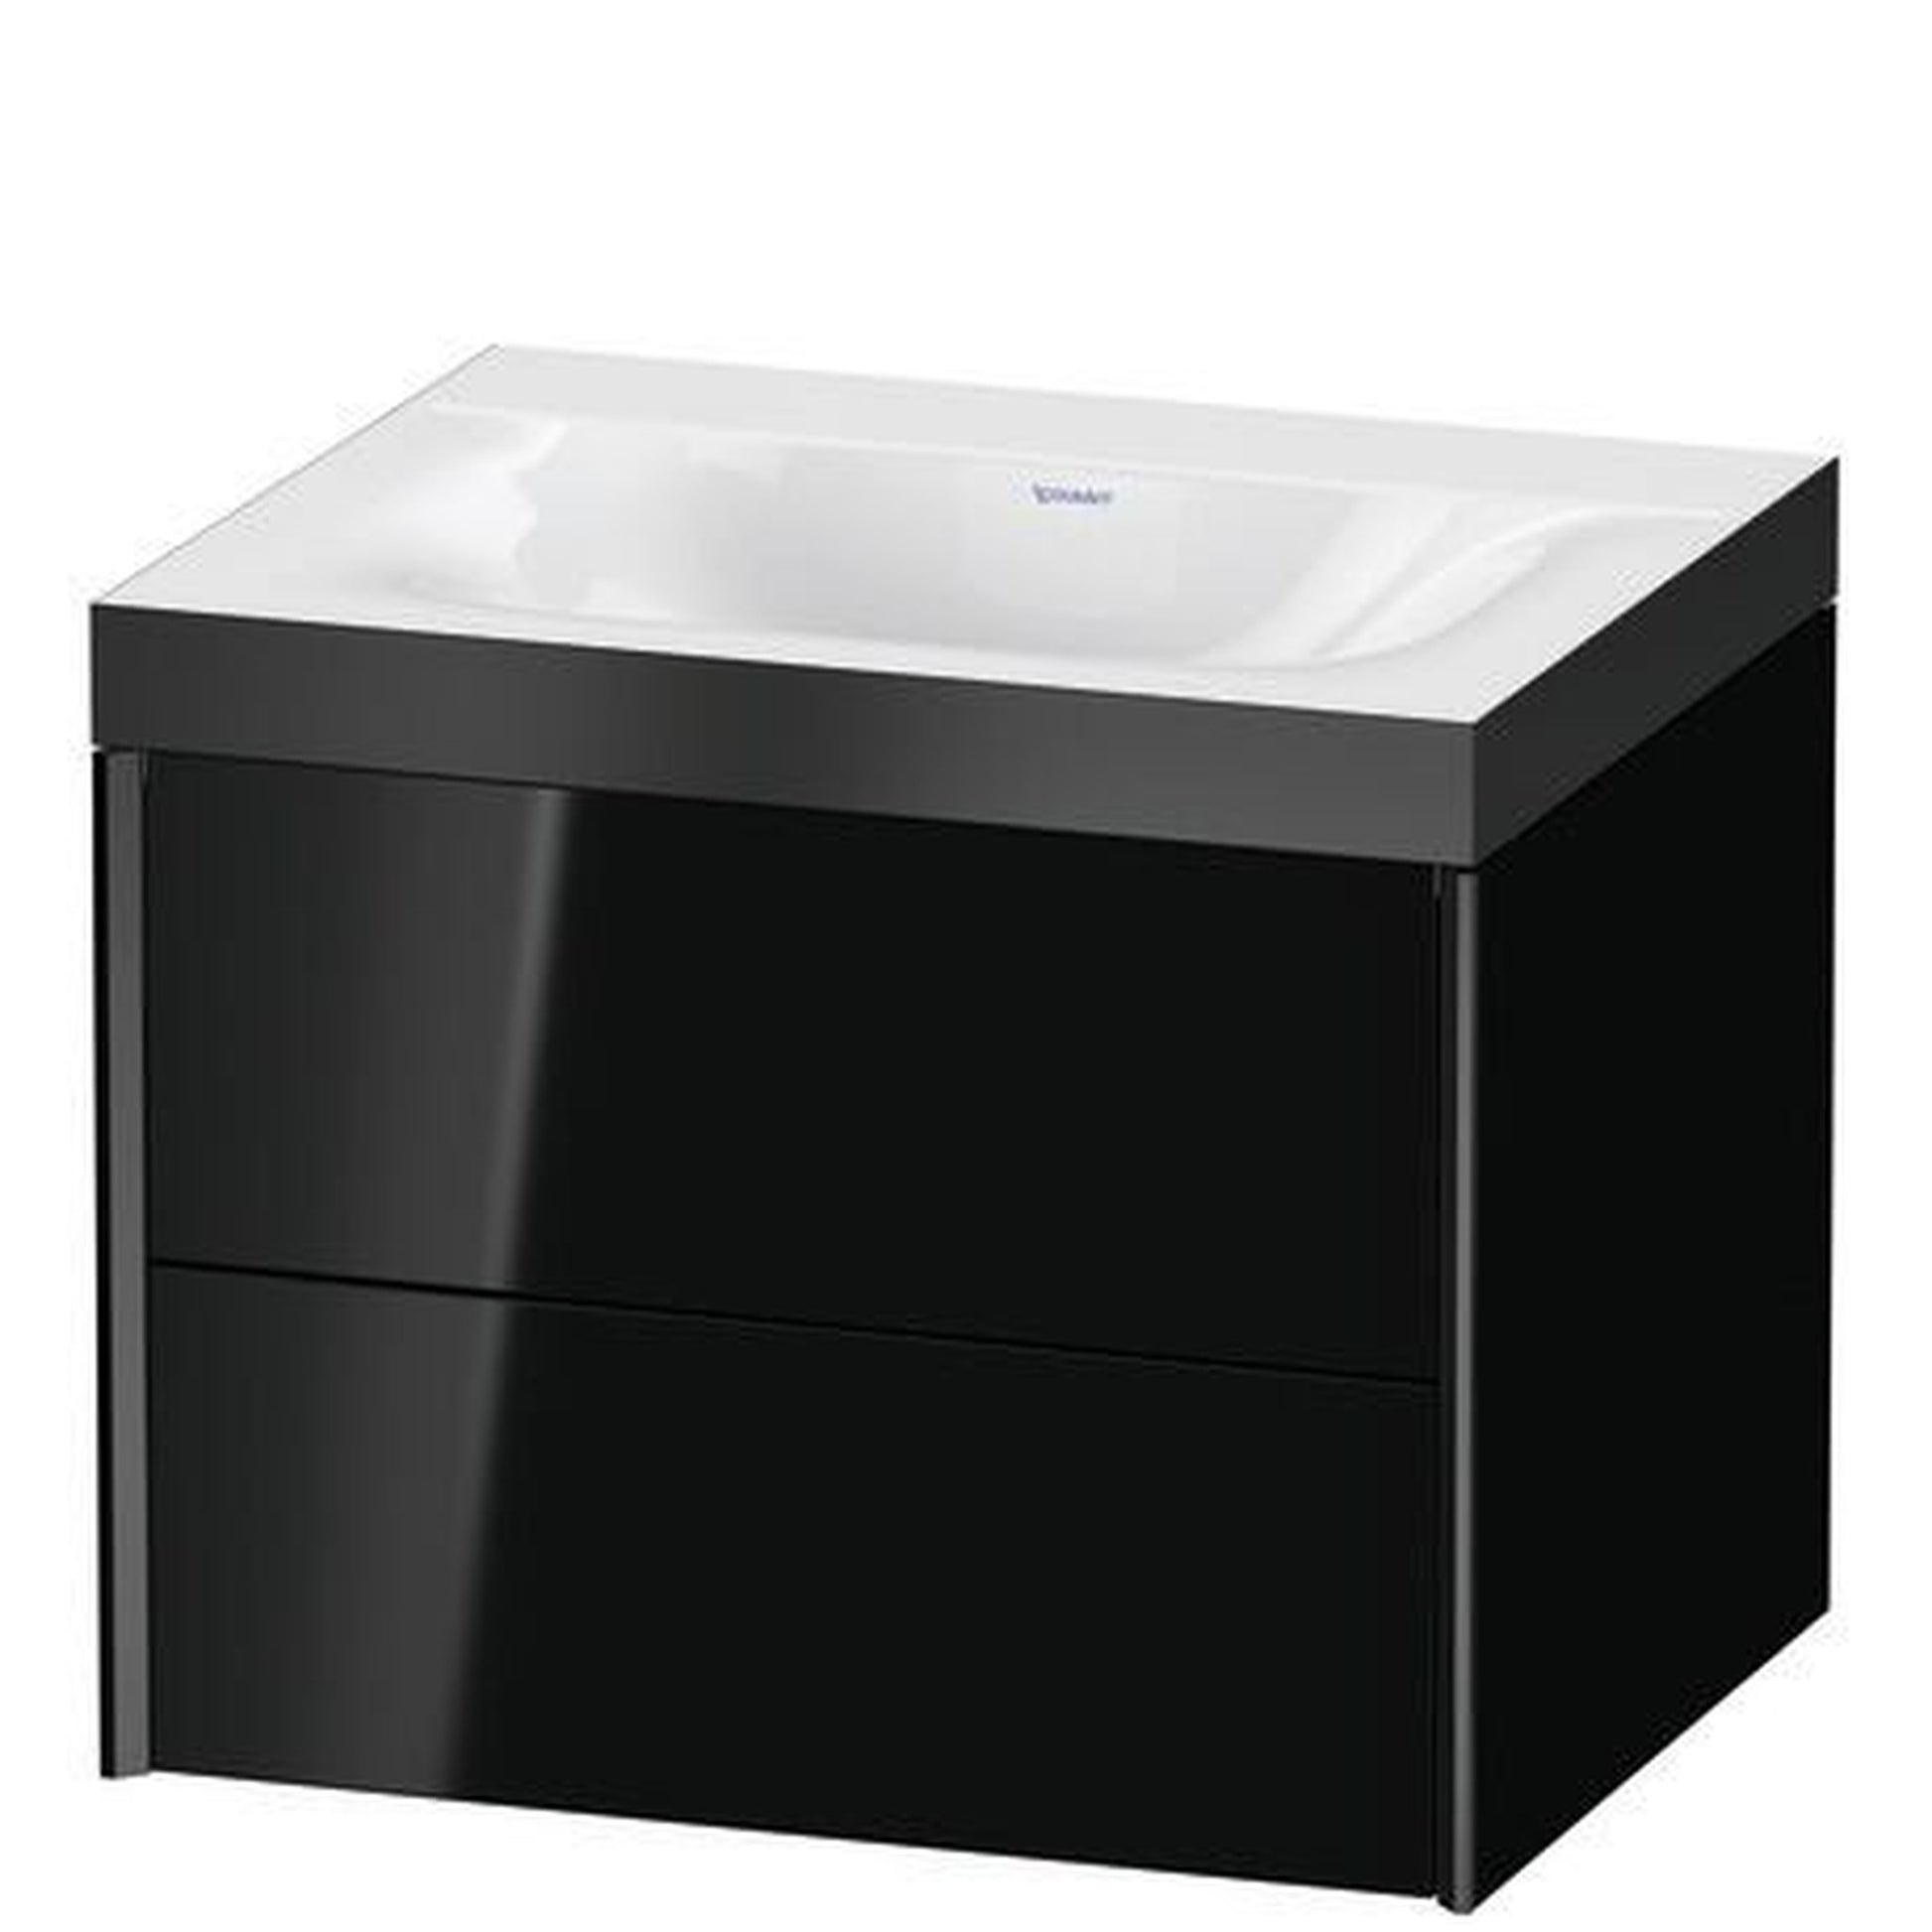 Duravit Xviu 24" x 20" x 19" Two Drawer C-Bonded Wall-Mount Vanity Kit Without Tap Hole, Black (XV4614NB240P)